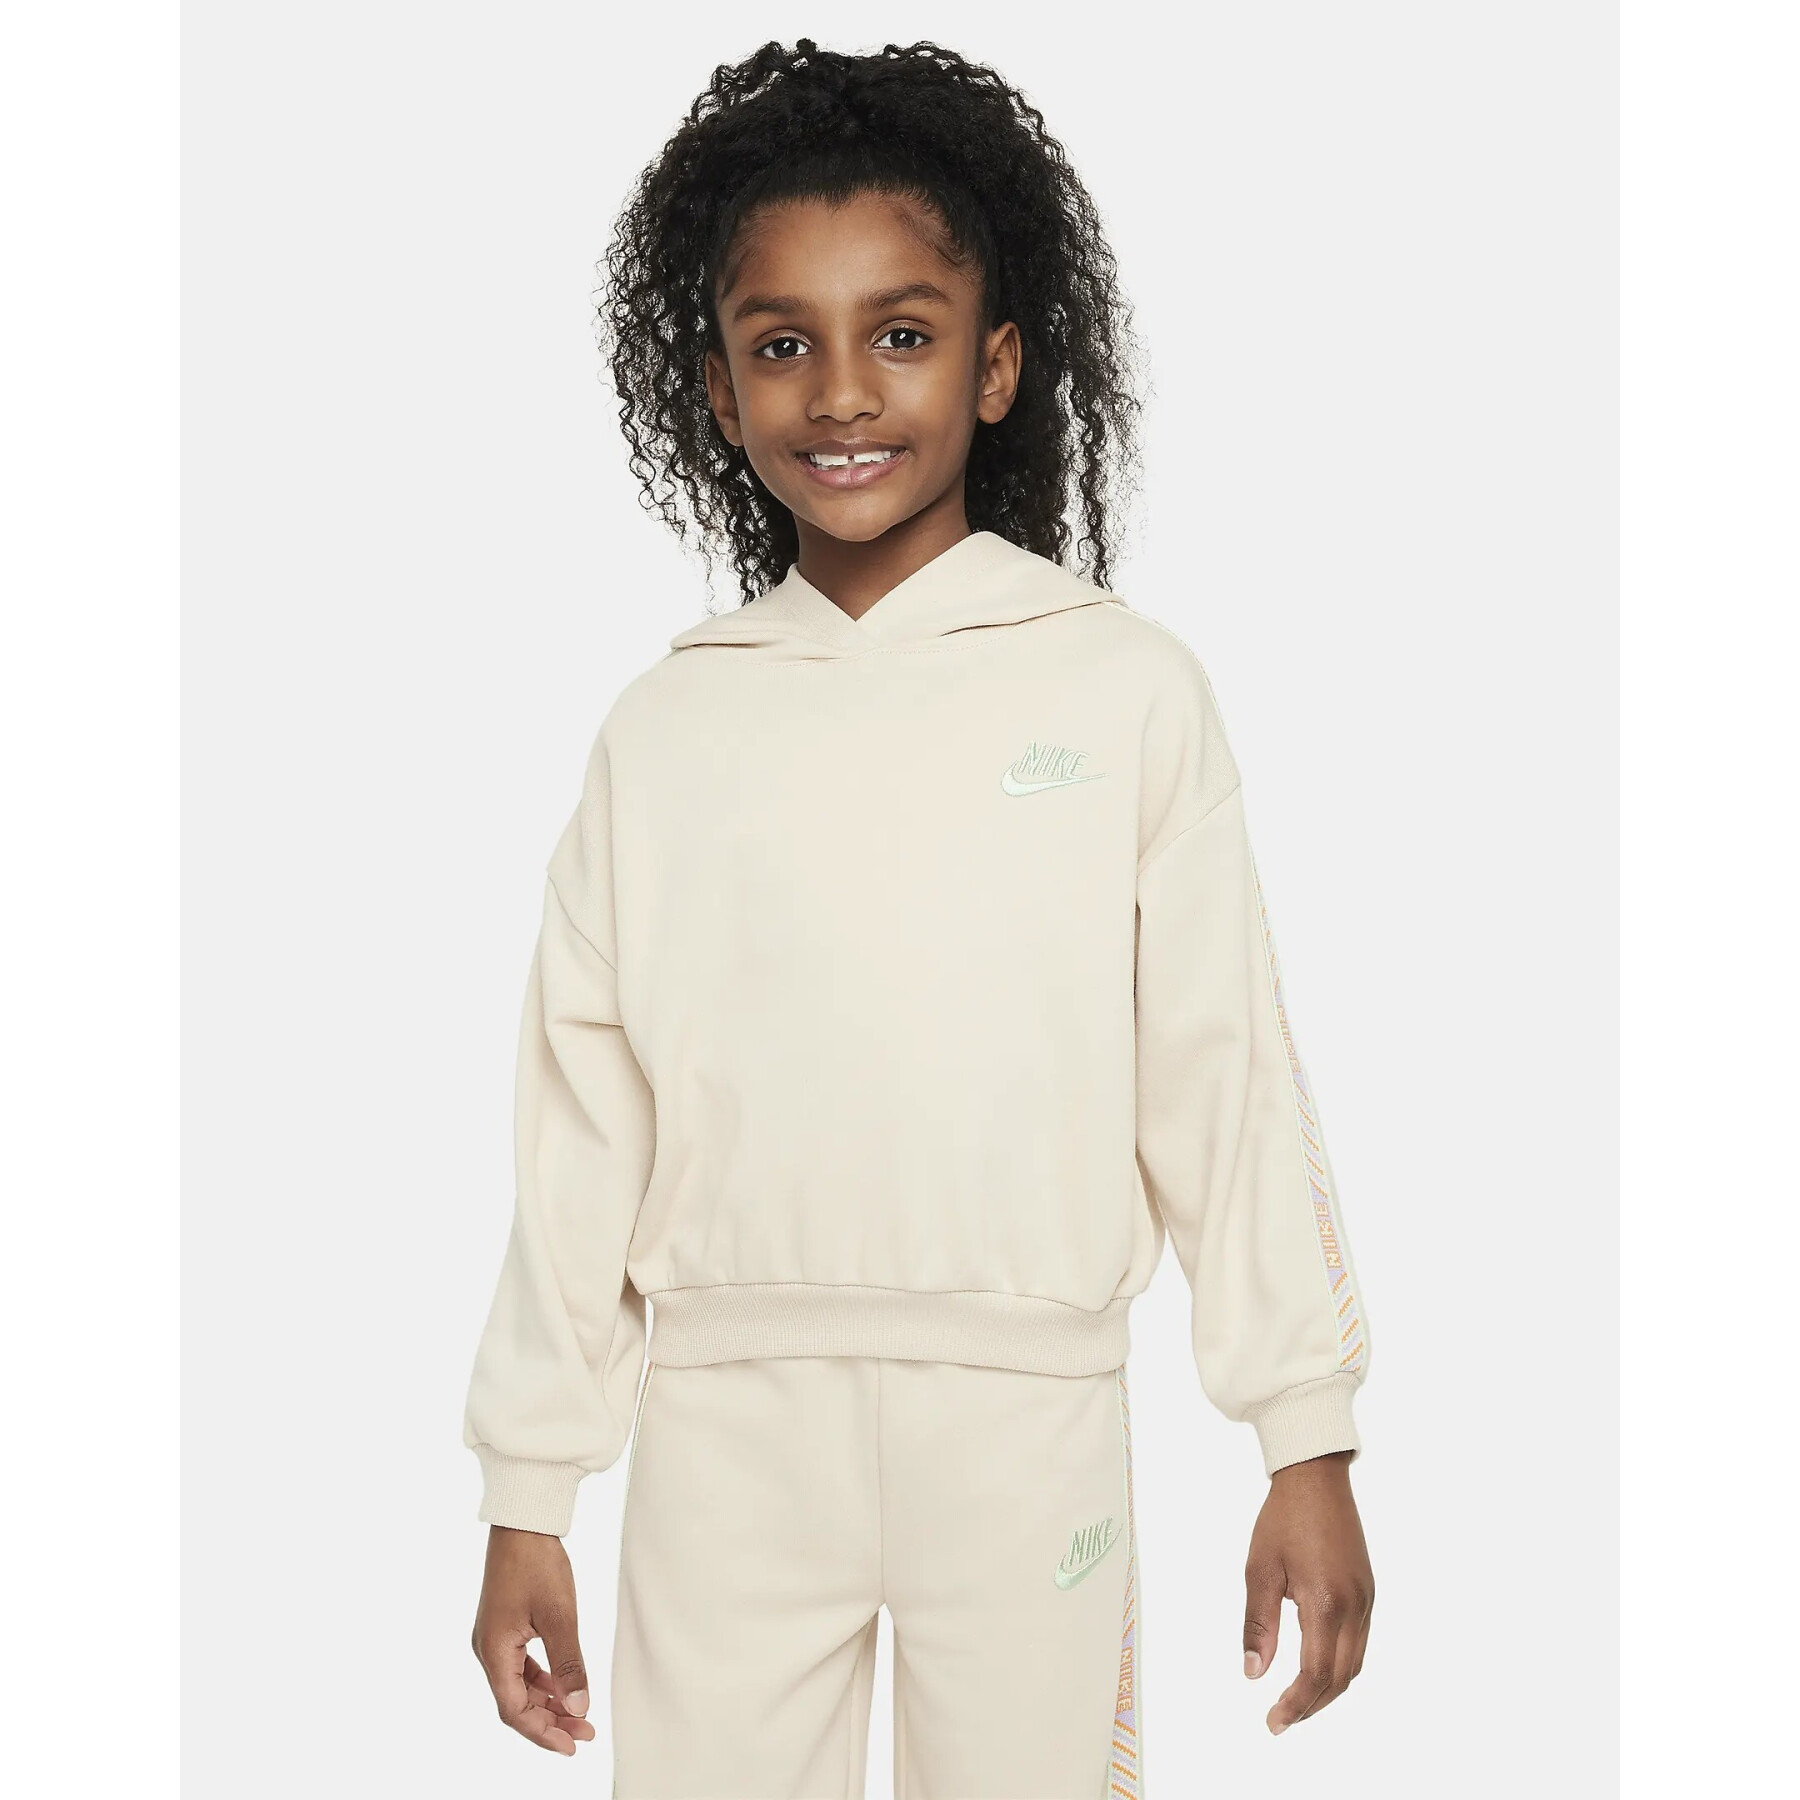 Girl's tracksuit Nike Happy Camper French Terry